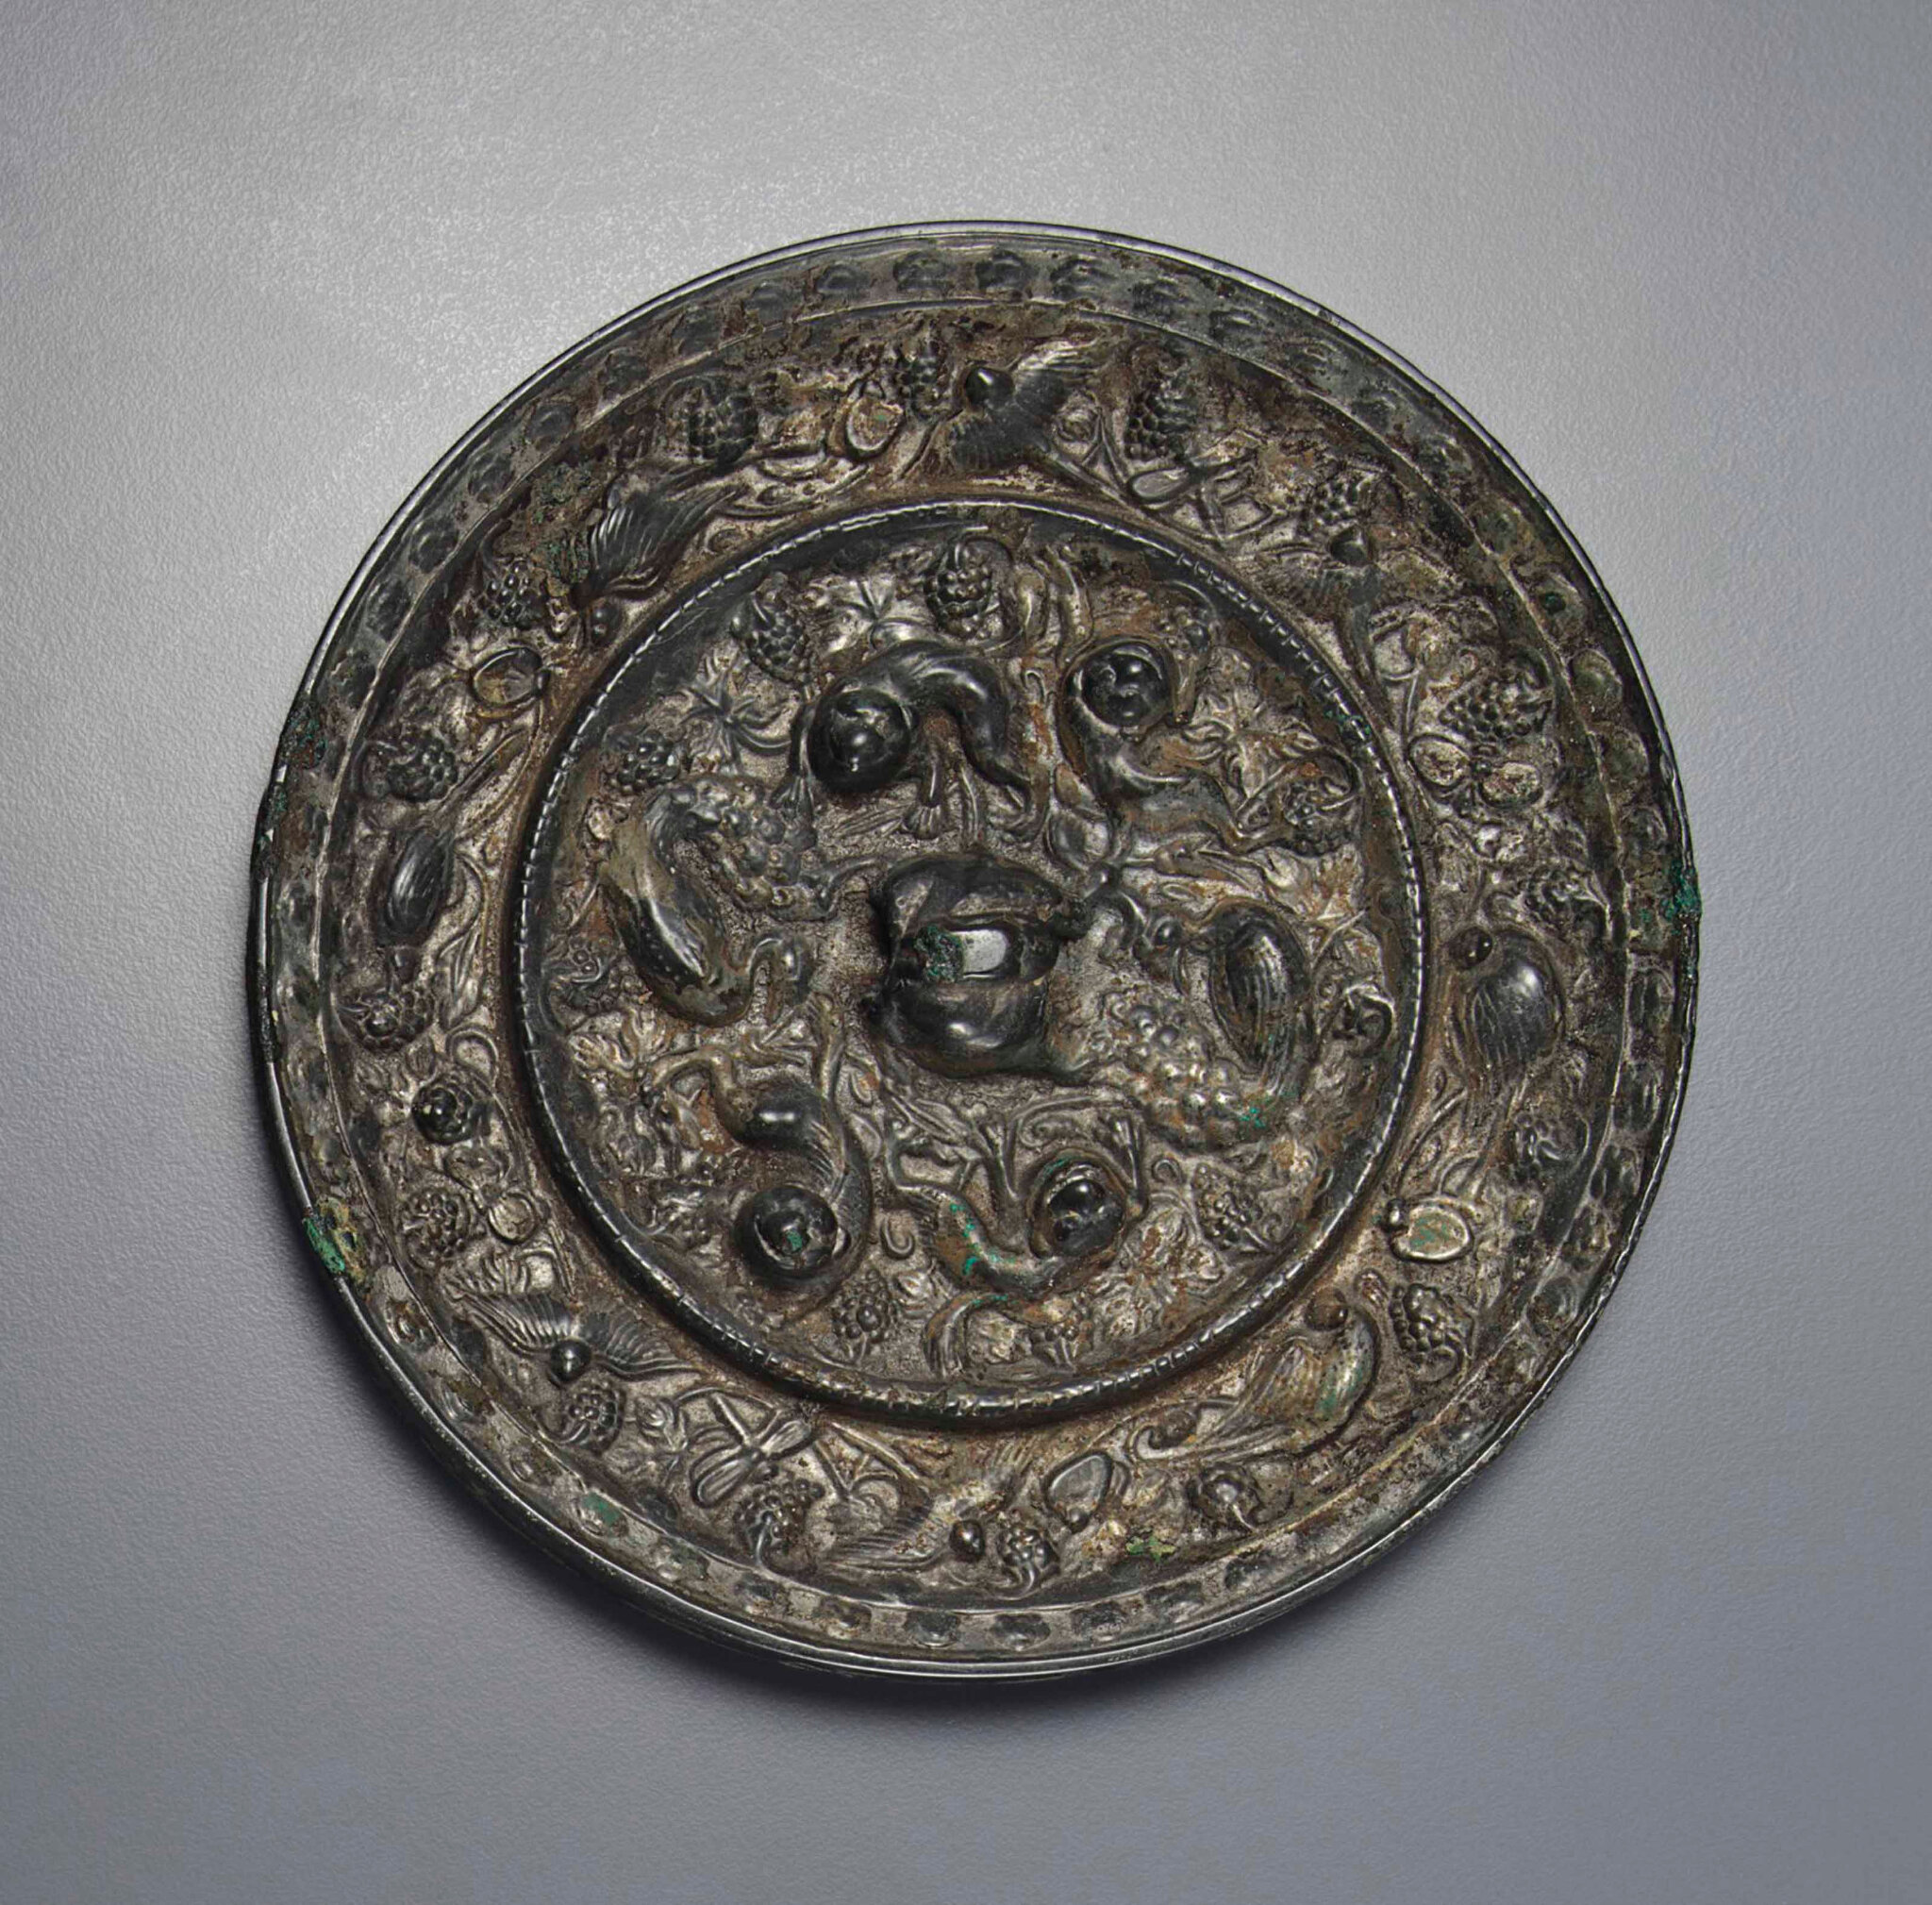 A bronze 'Lion and grapevine' circular mirror, Tang dynasty (AD 618-907)